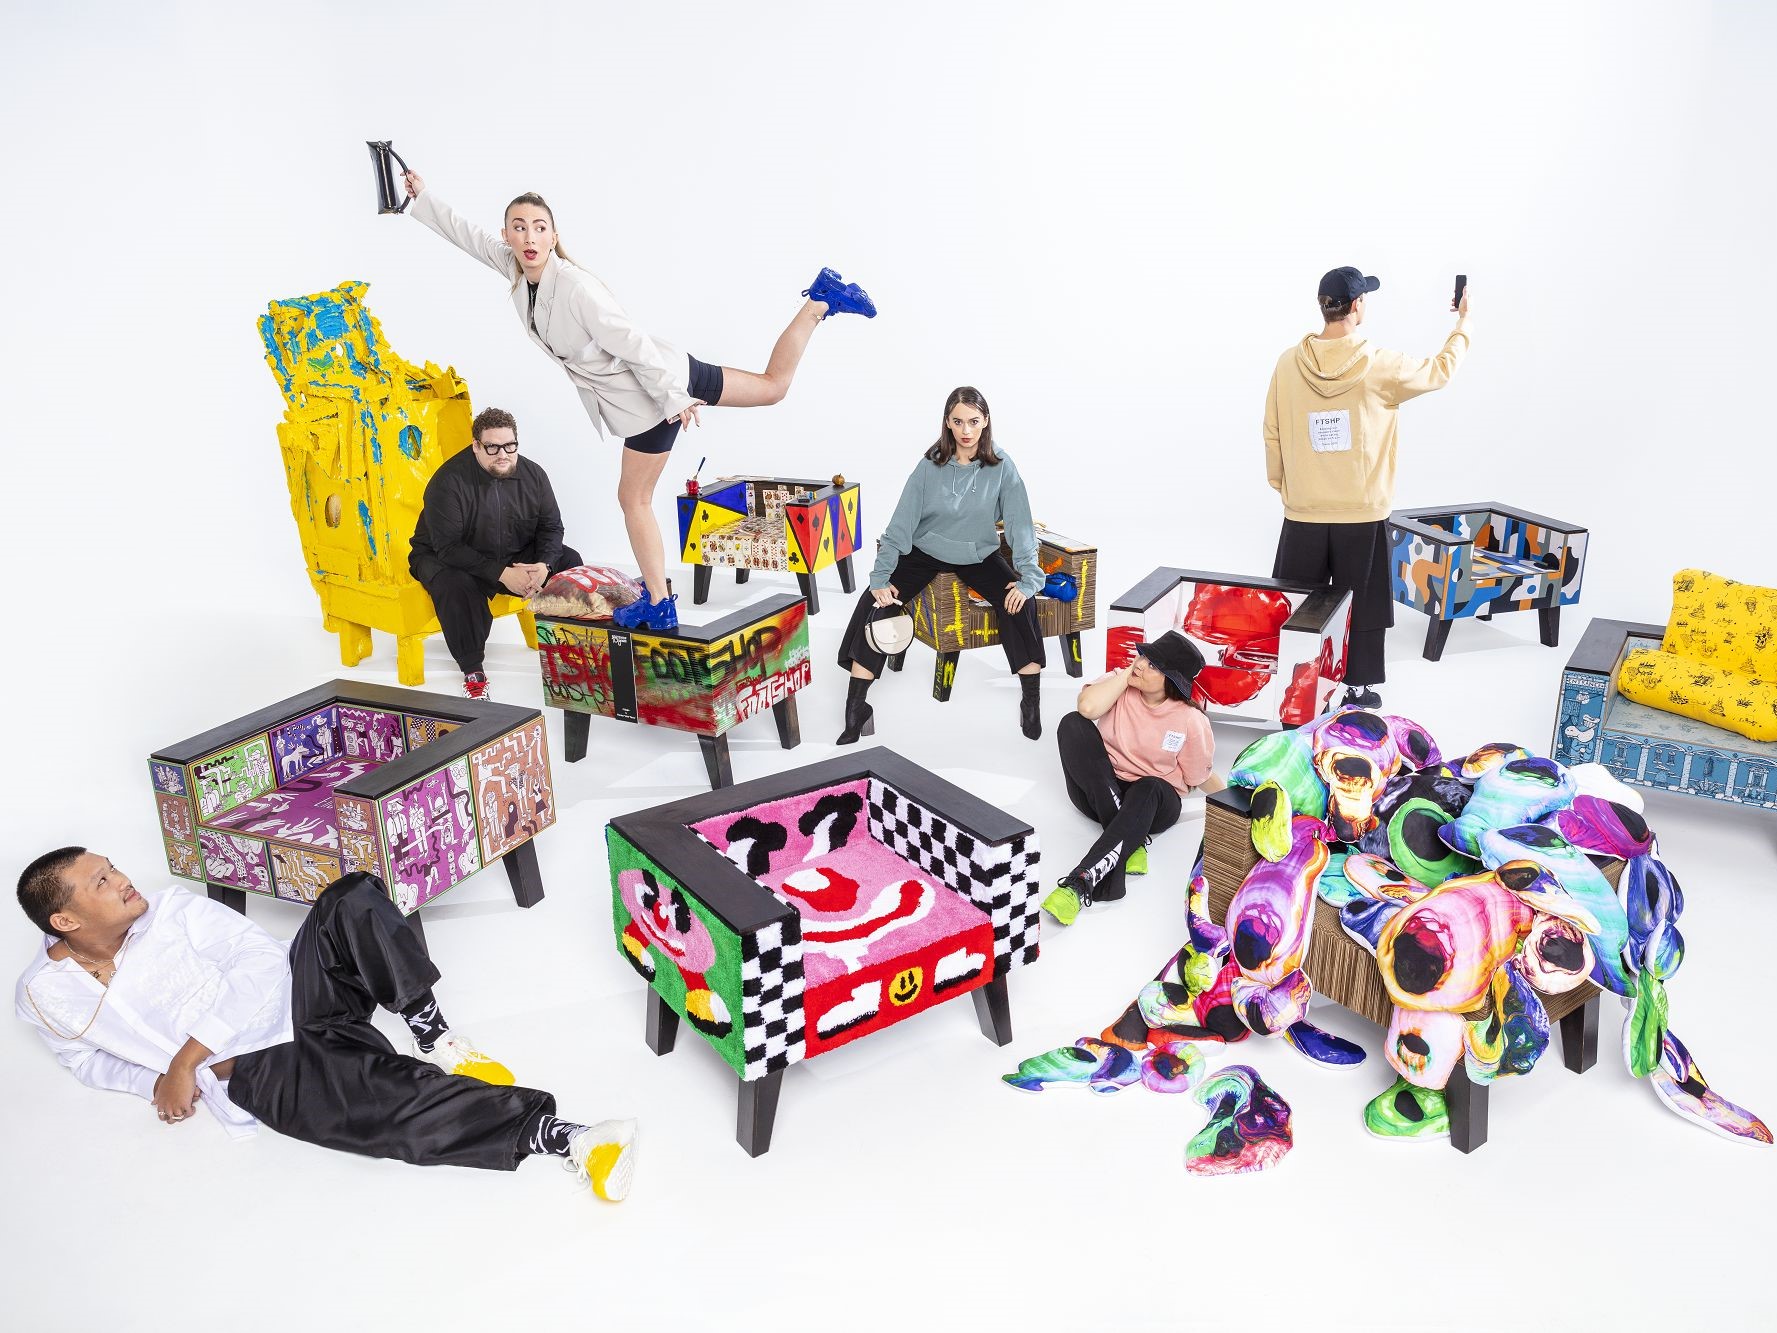 Footshop presents 10 unique cardboard chairs accompanied by custom sneakers and the Reebok collection